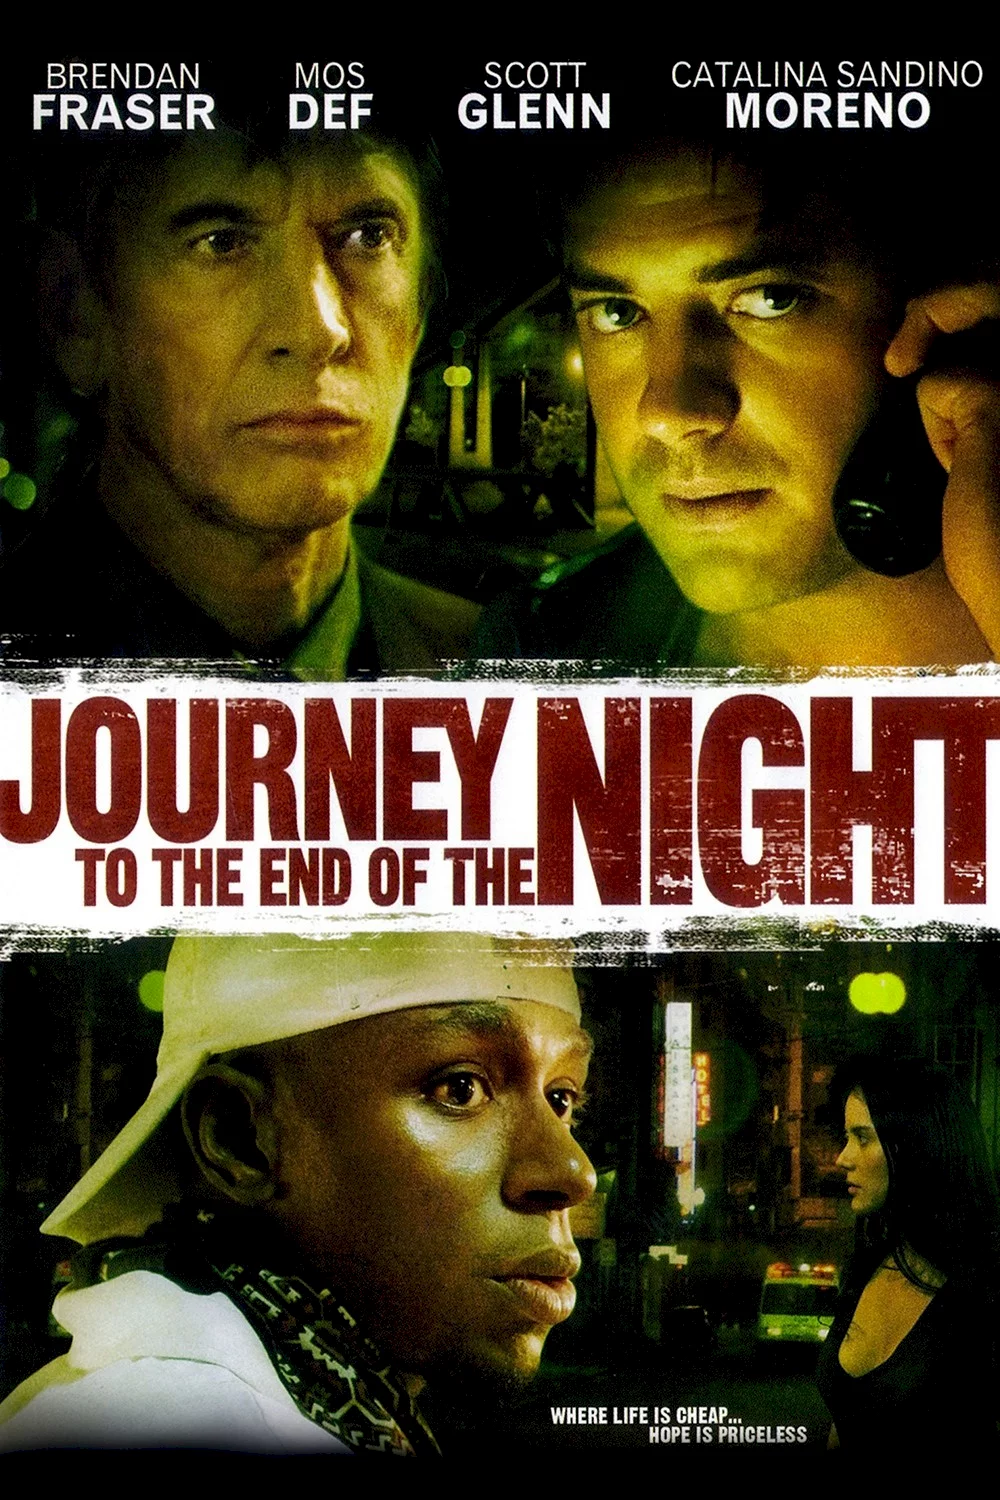 Photo du film : End of the night